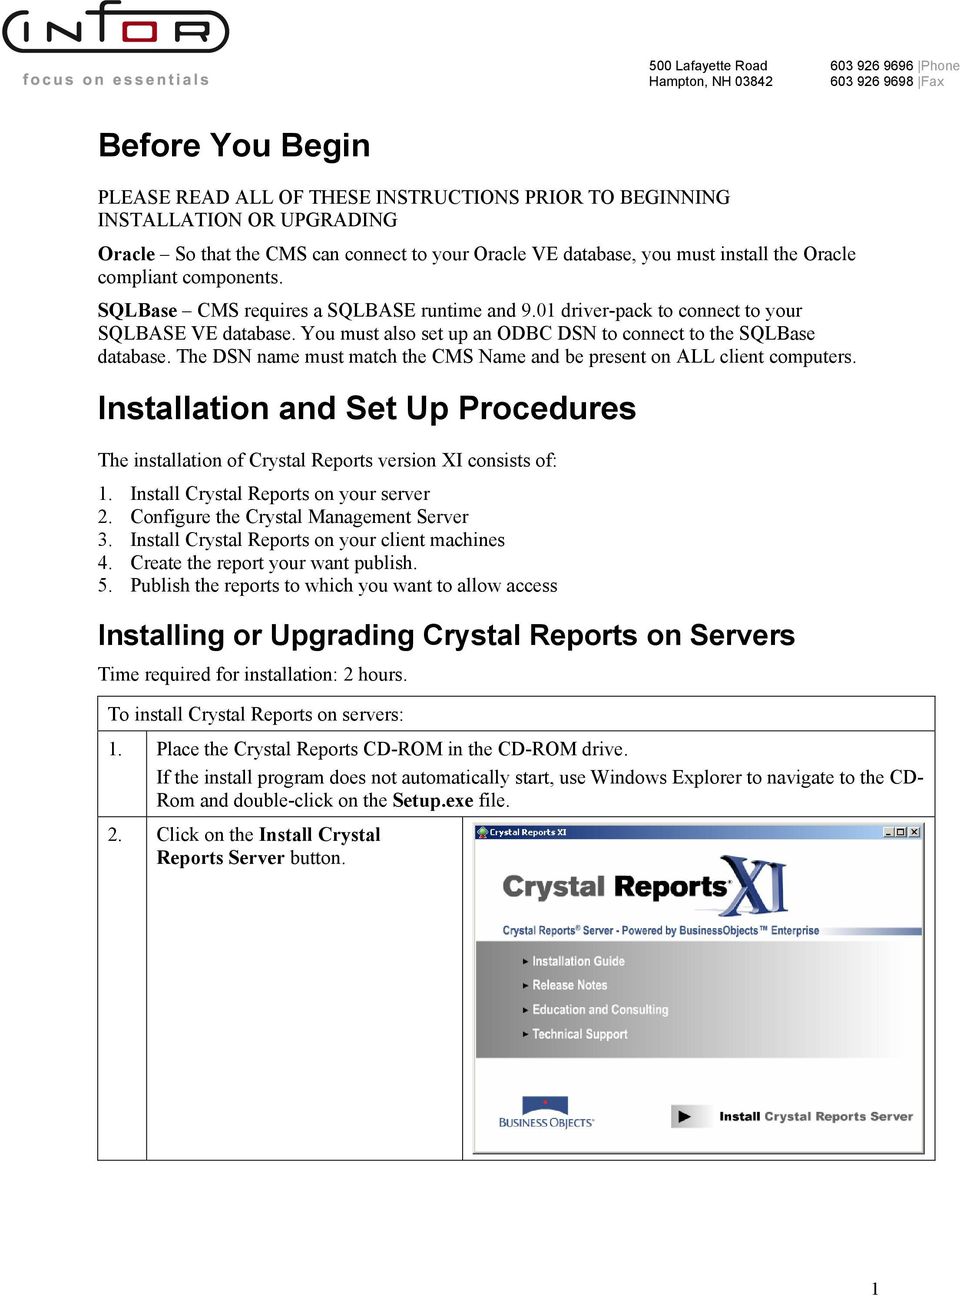 The DSN name must match the CMS Name and be present on ALL client computers. Installation and Set Up Procedures The installation of Crystal Reports version XI consists of: 1.